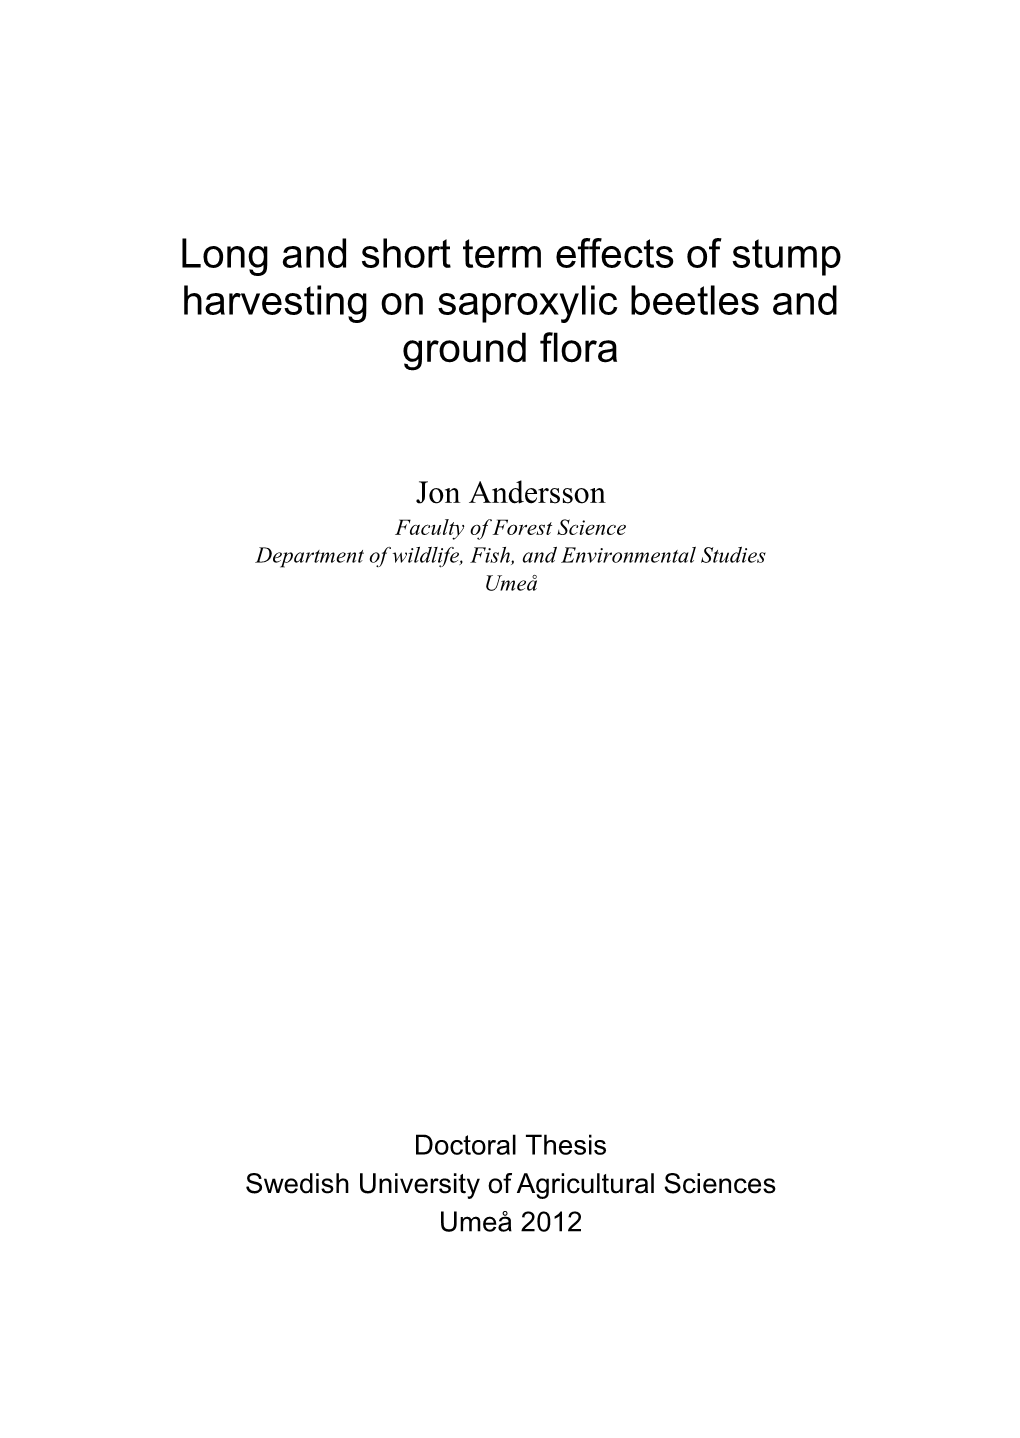 Long and Short Term Effects of Stump Harvesting on Saproxylic Beetles and Ground Flora